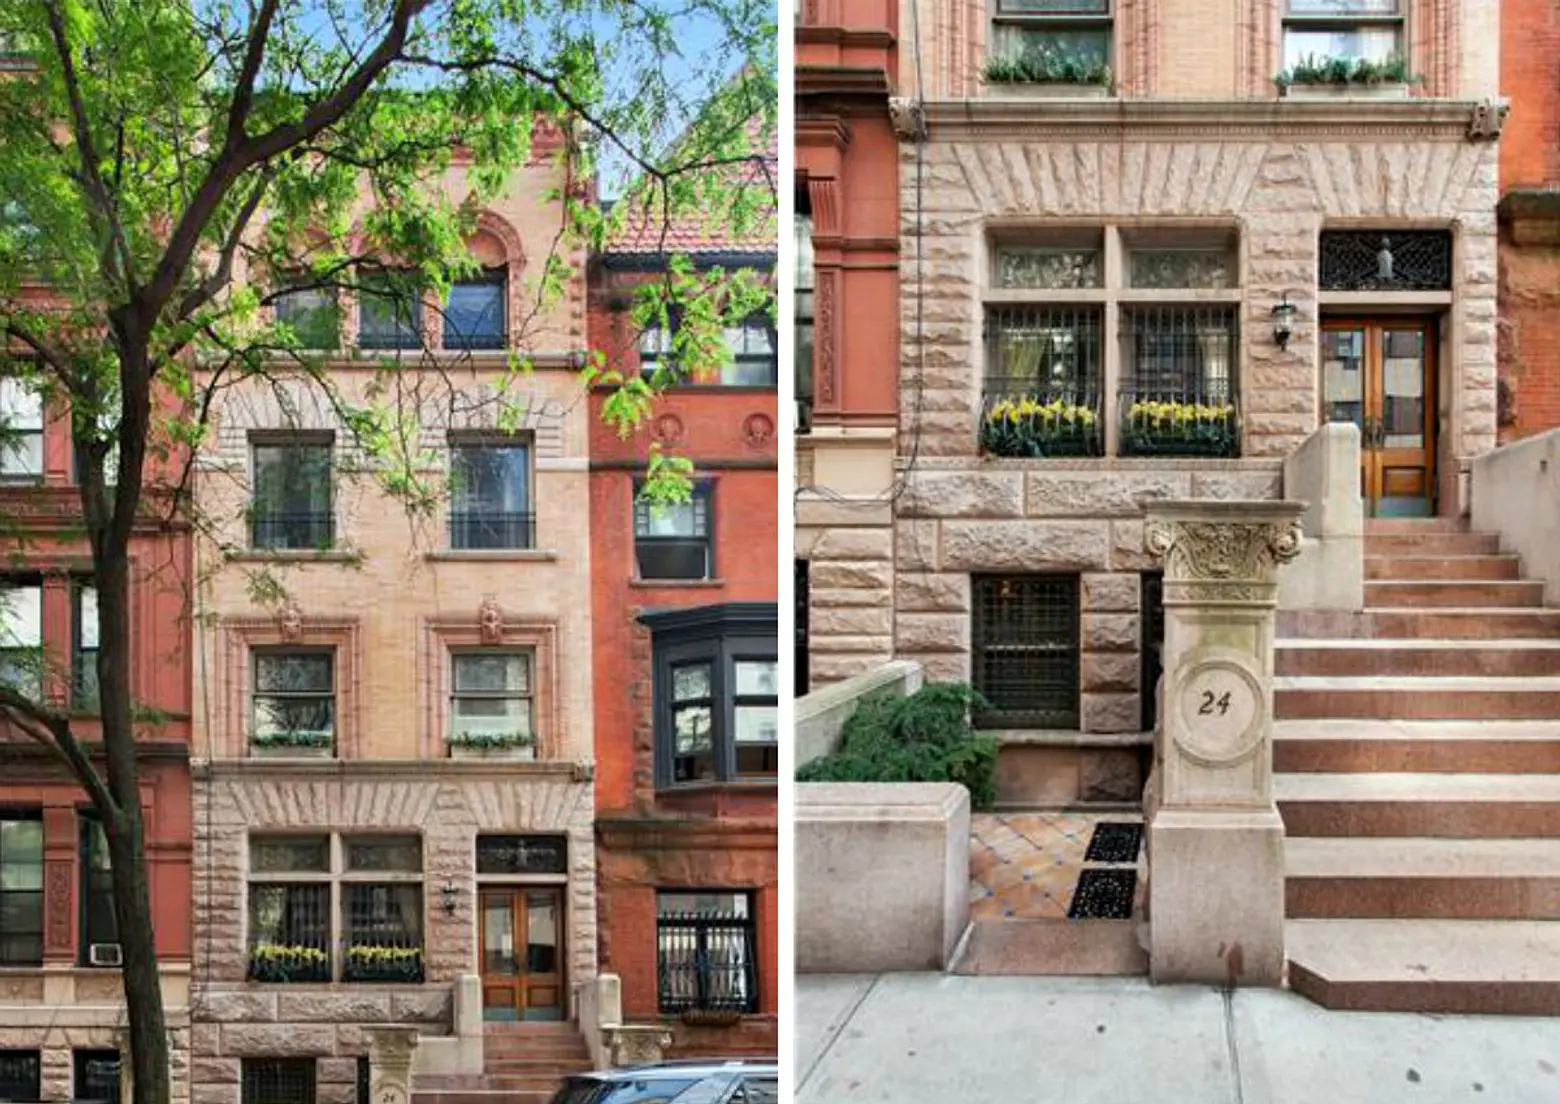 24 West 71st Street, Upper West Side townhouse, most expensive townhouses, Lamb and Rich